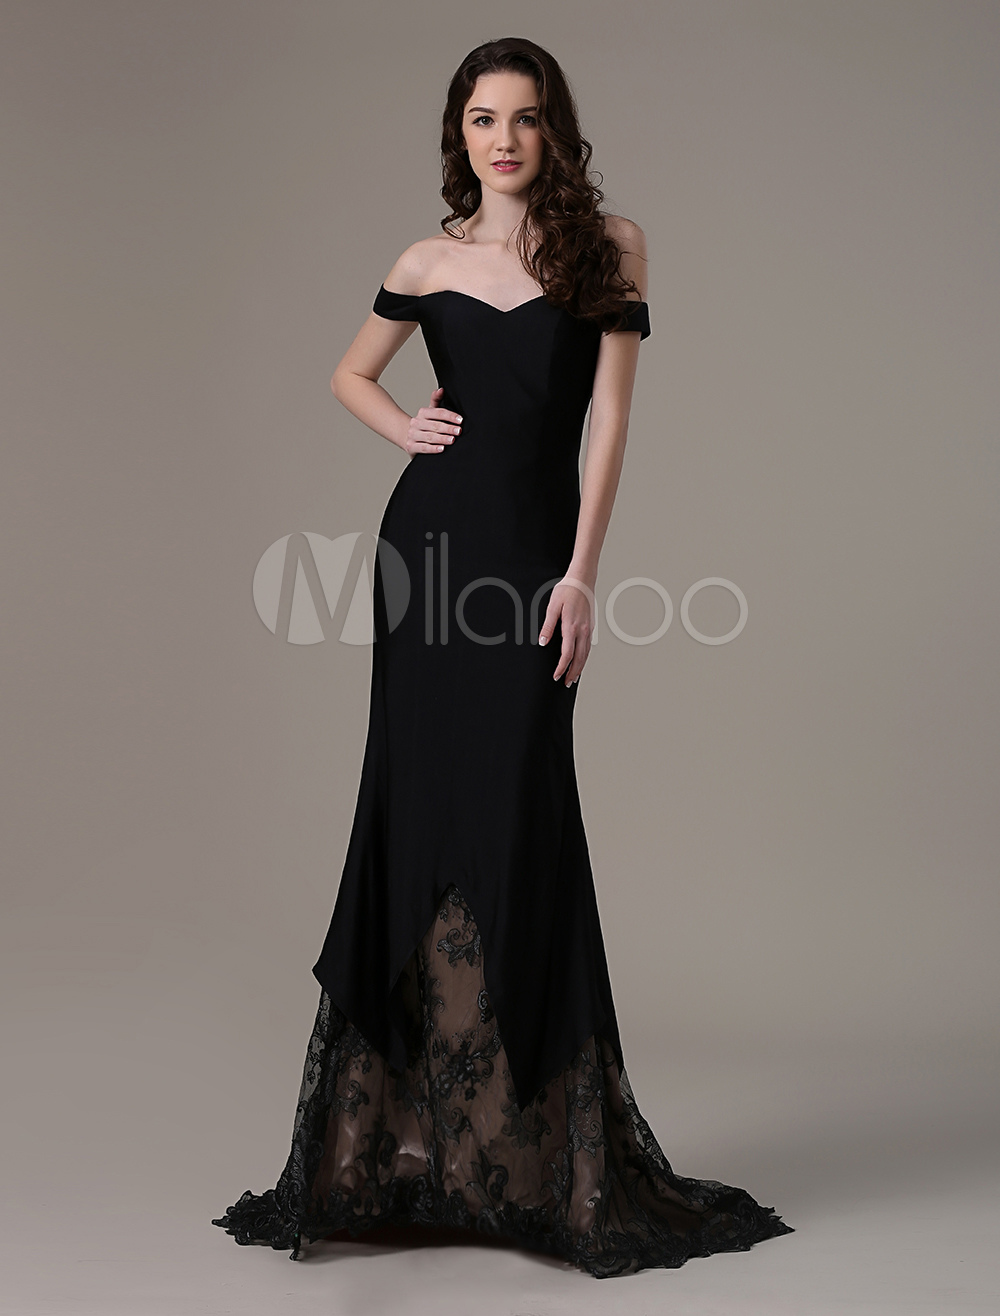 Black Off-the-Shouder Mermaid Evening Gown With Lace Train - Milanoo.com